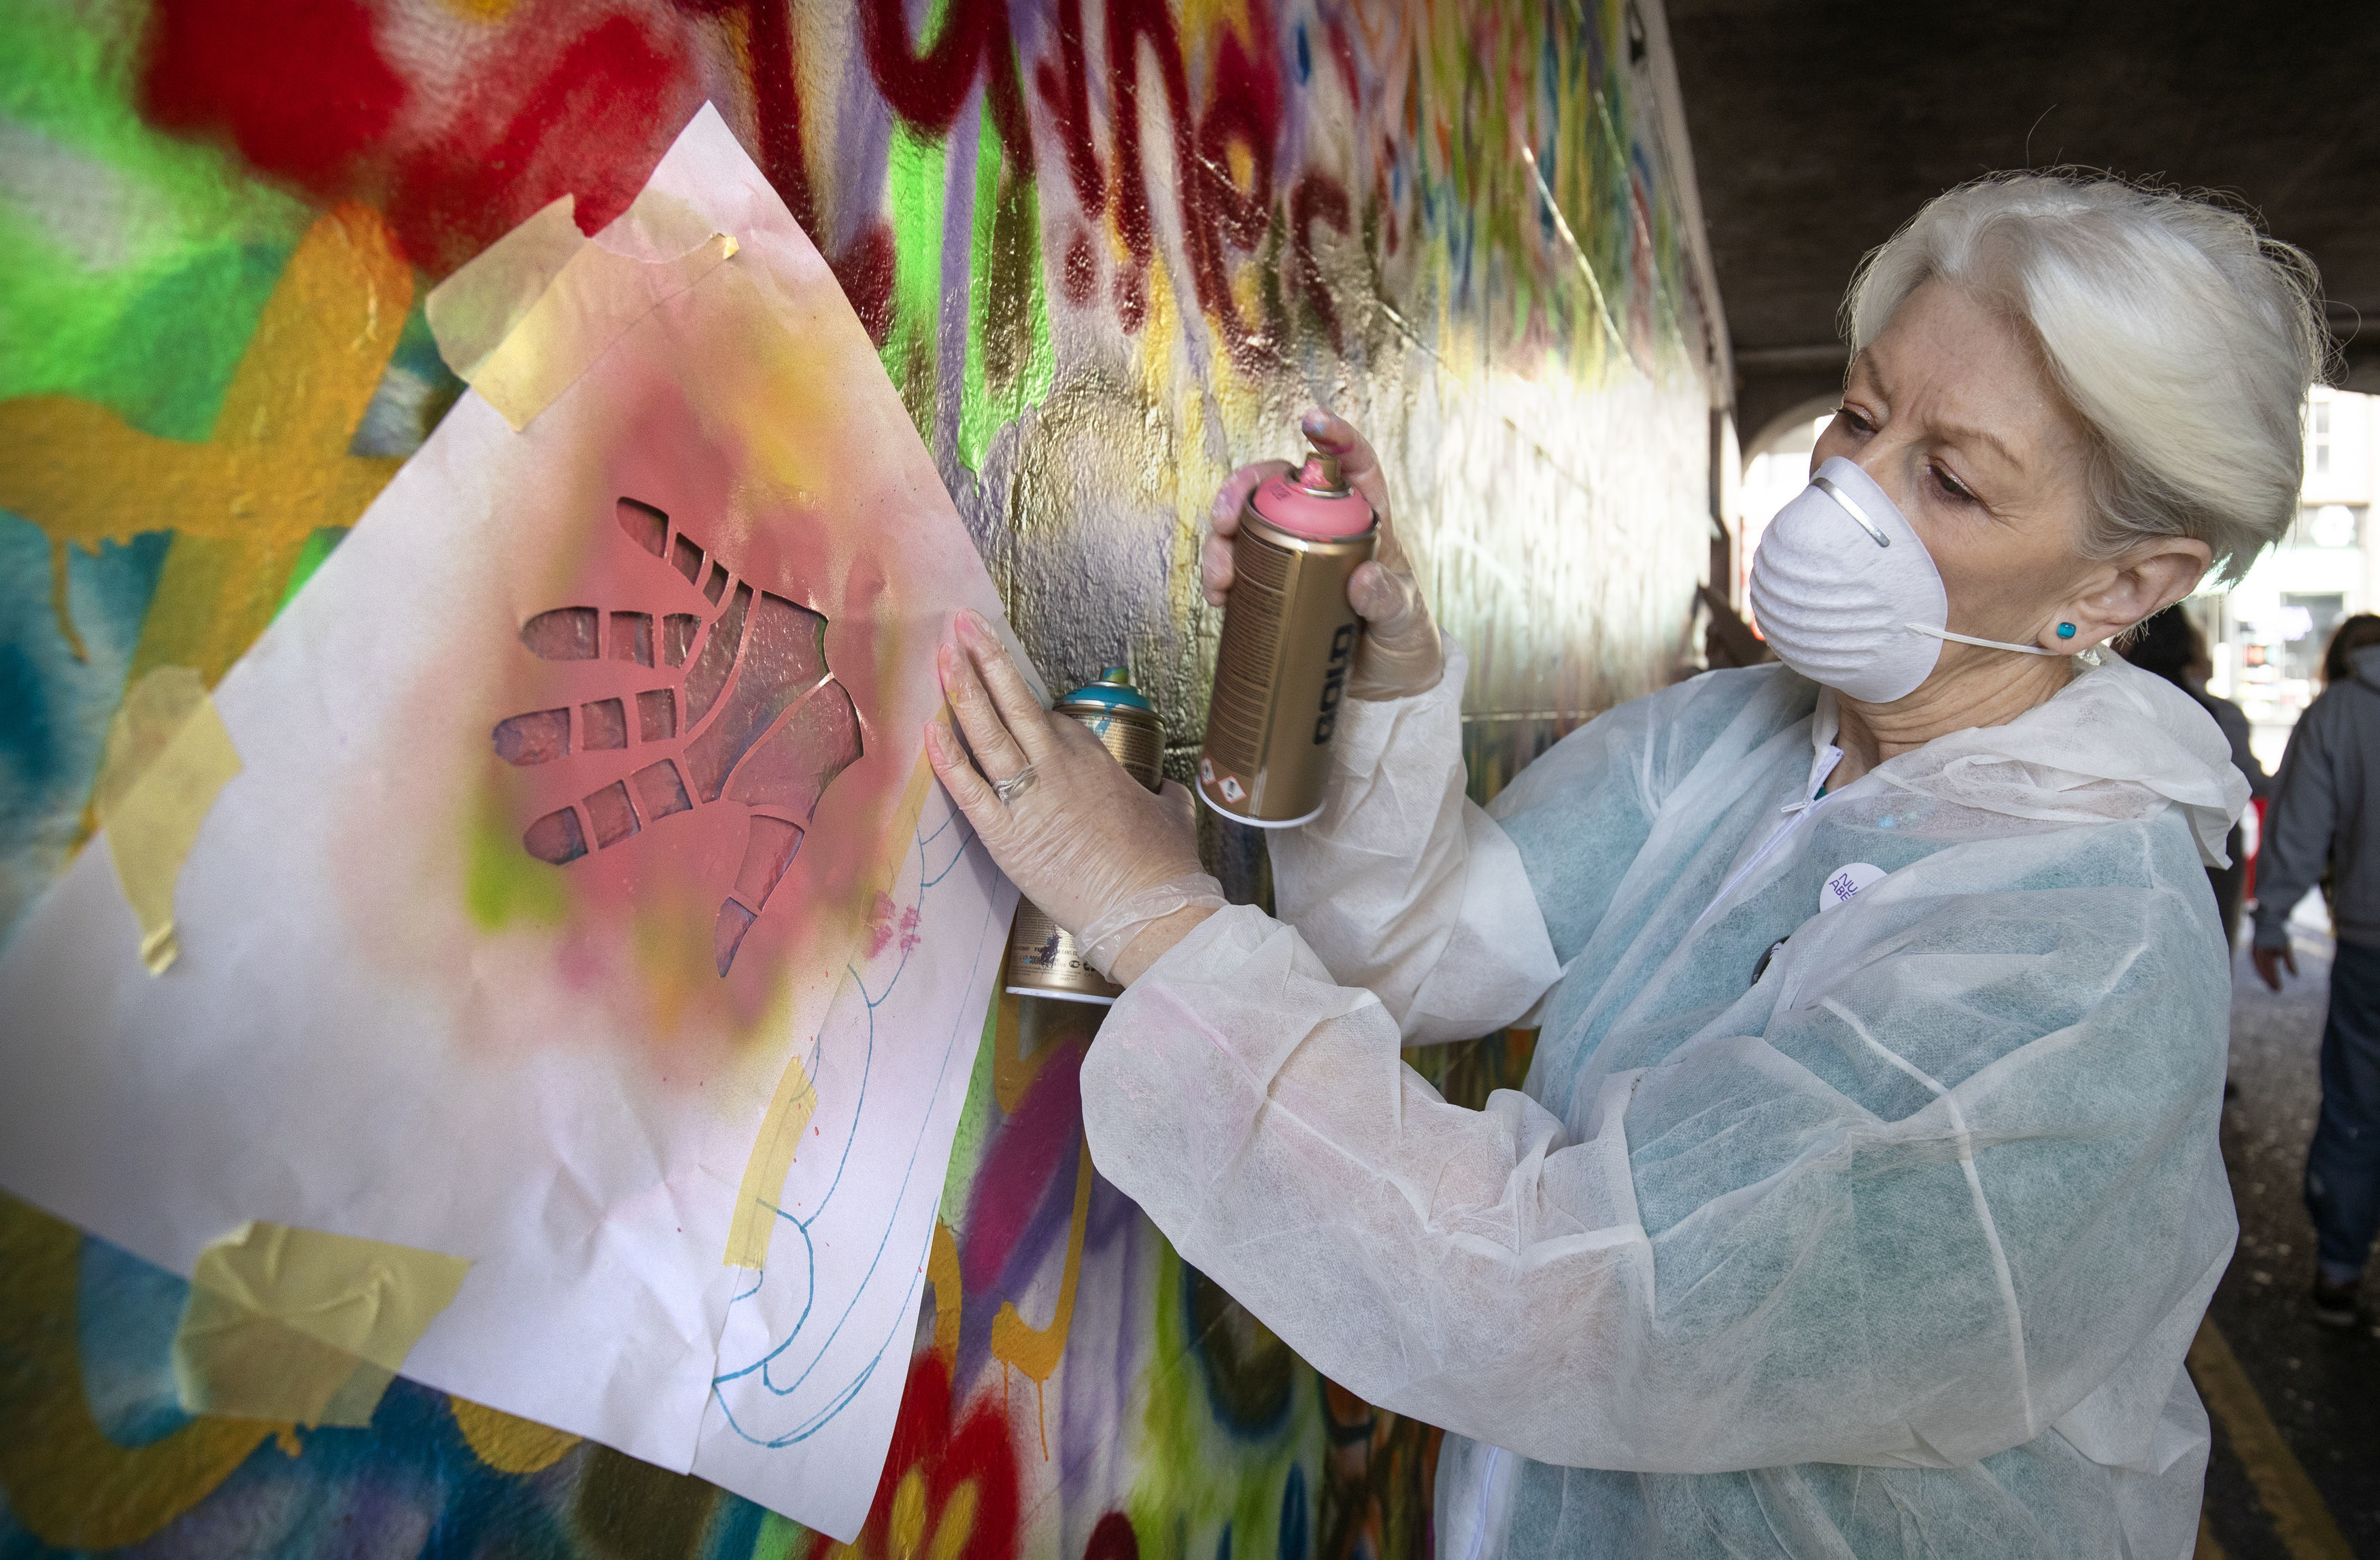 Maggie Wilcockson, aged 70, one of the 'Graffiti Grannies' that took part in an over-65s street-art workshop at this year's Nuart Aberdeen Festival.